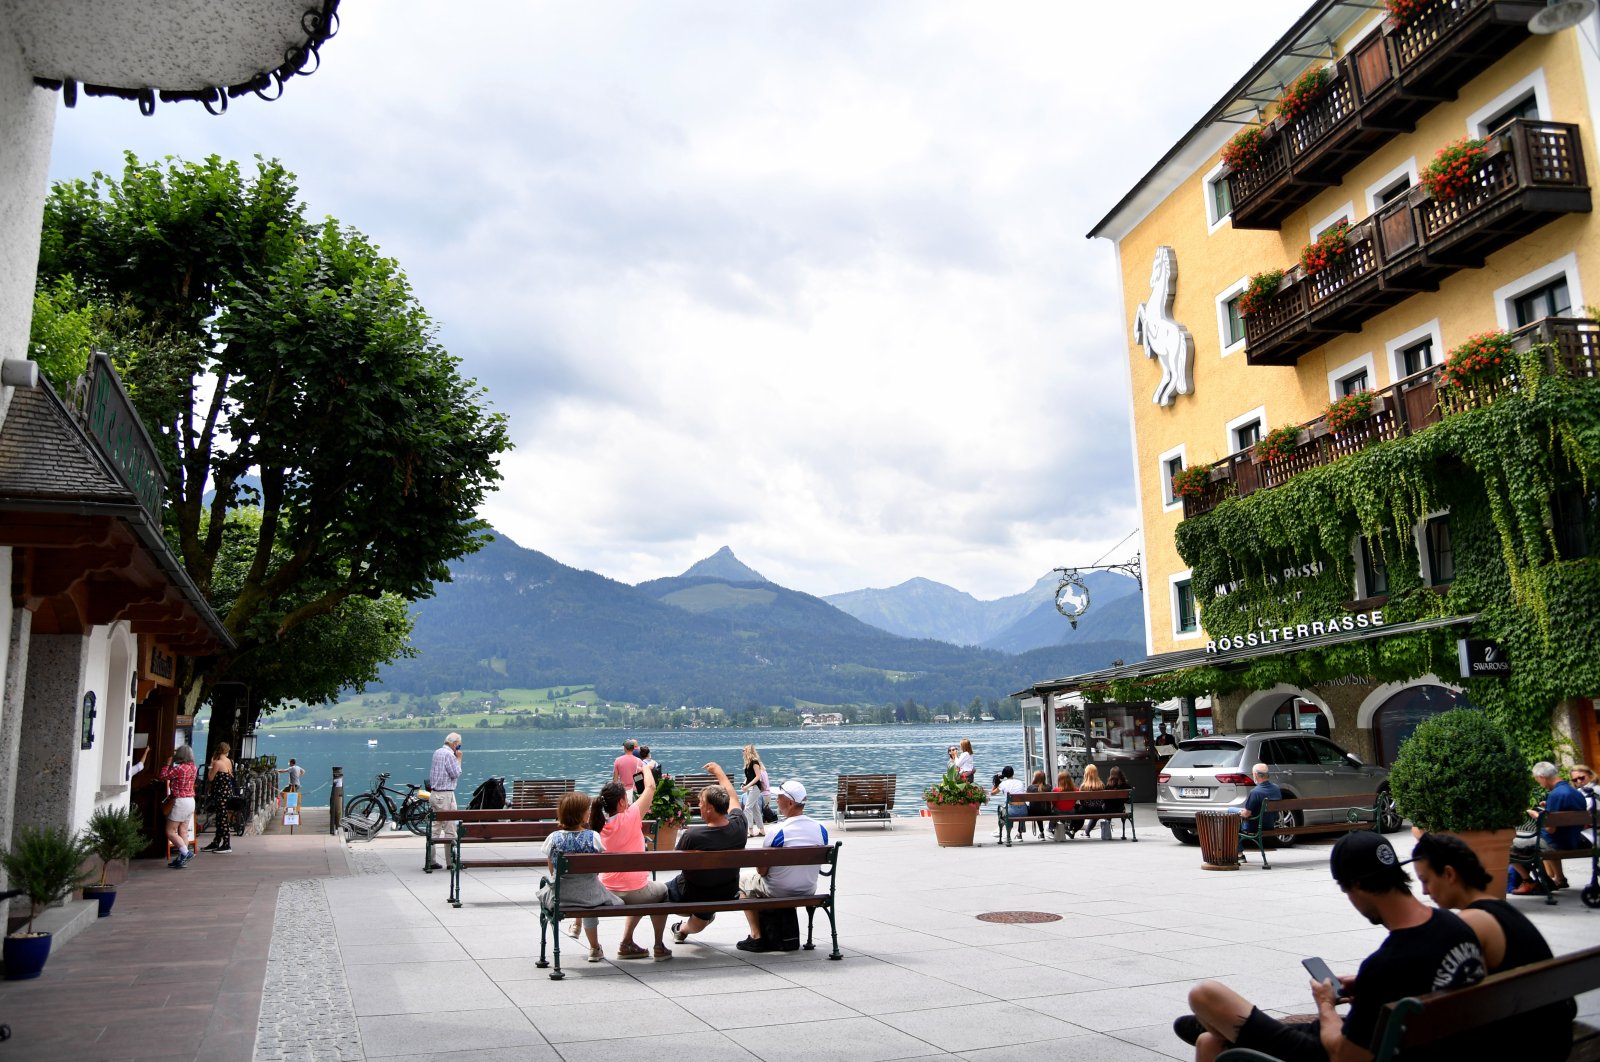 Holidaymakers are seen close to a pleasure boat embarkation point amid the coronavirus spread, at the banks of Wolfgangsee Lake in St. Wolfgang, Austria, July 24, 2020. (AFP Photo)